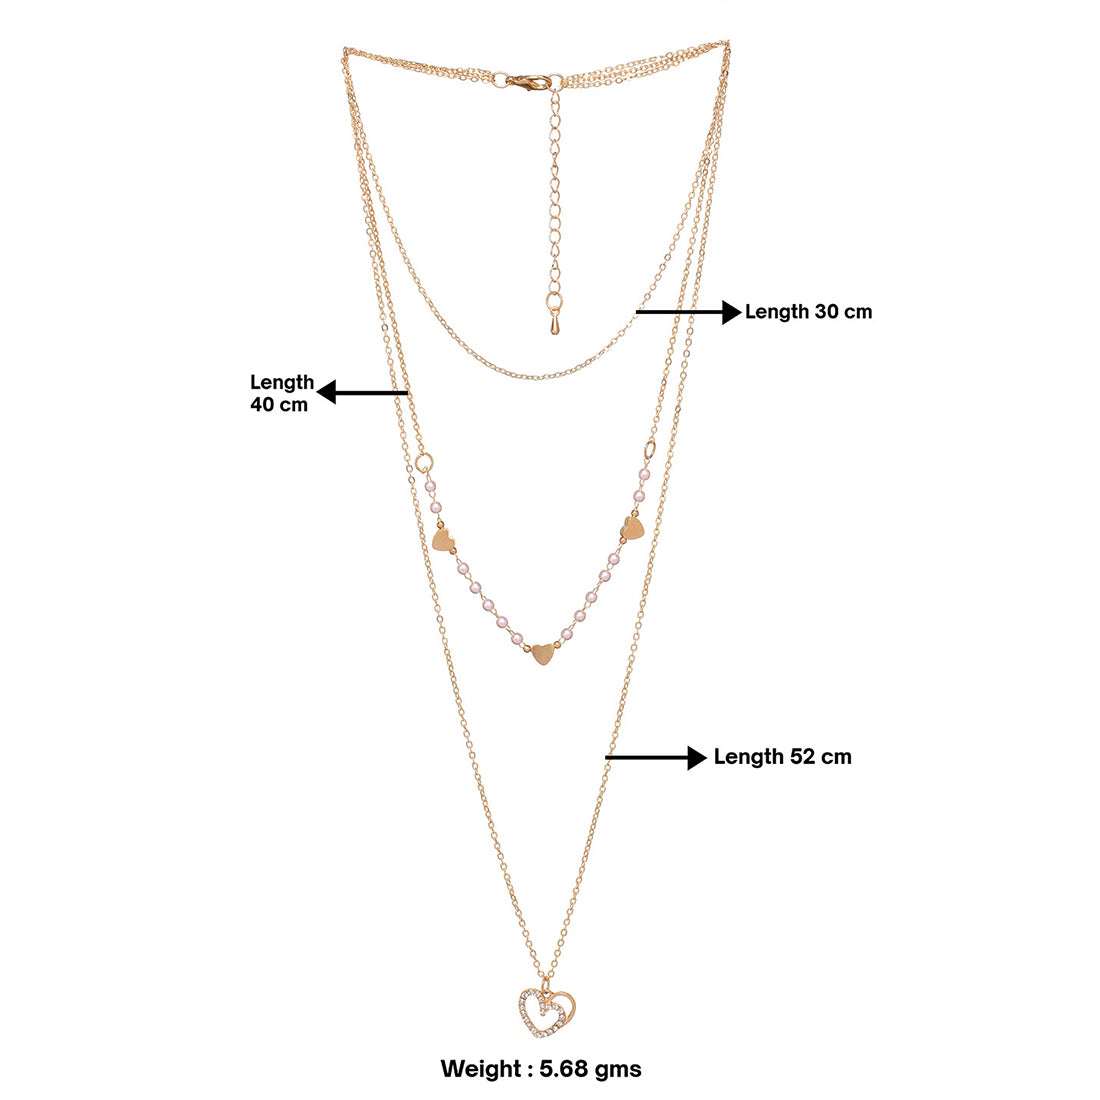 Chic & Trendy Three Layered Gold Necklace with Two Hearts Pendant and Diamante